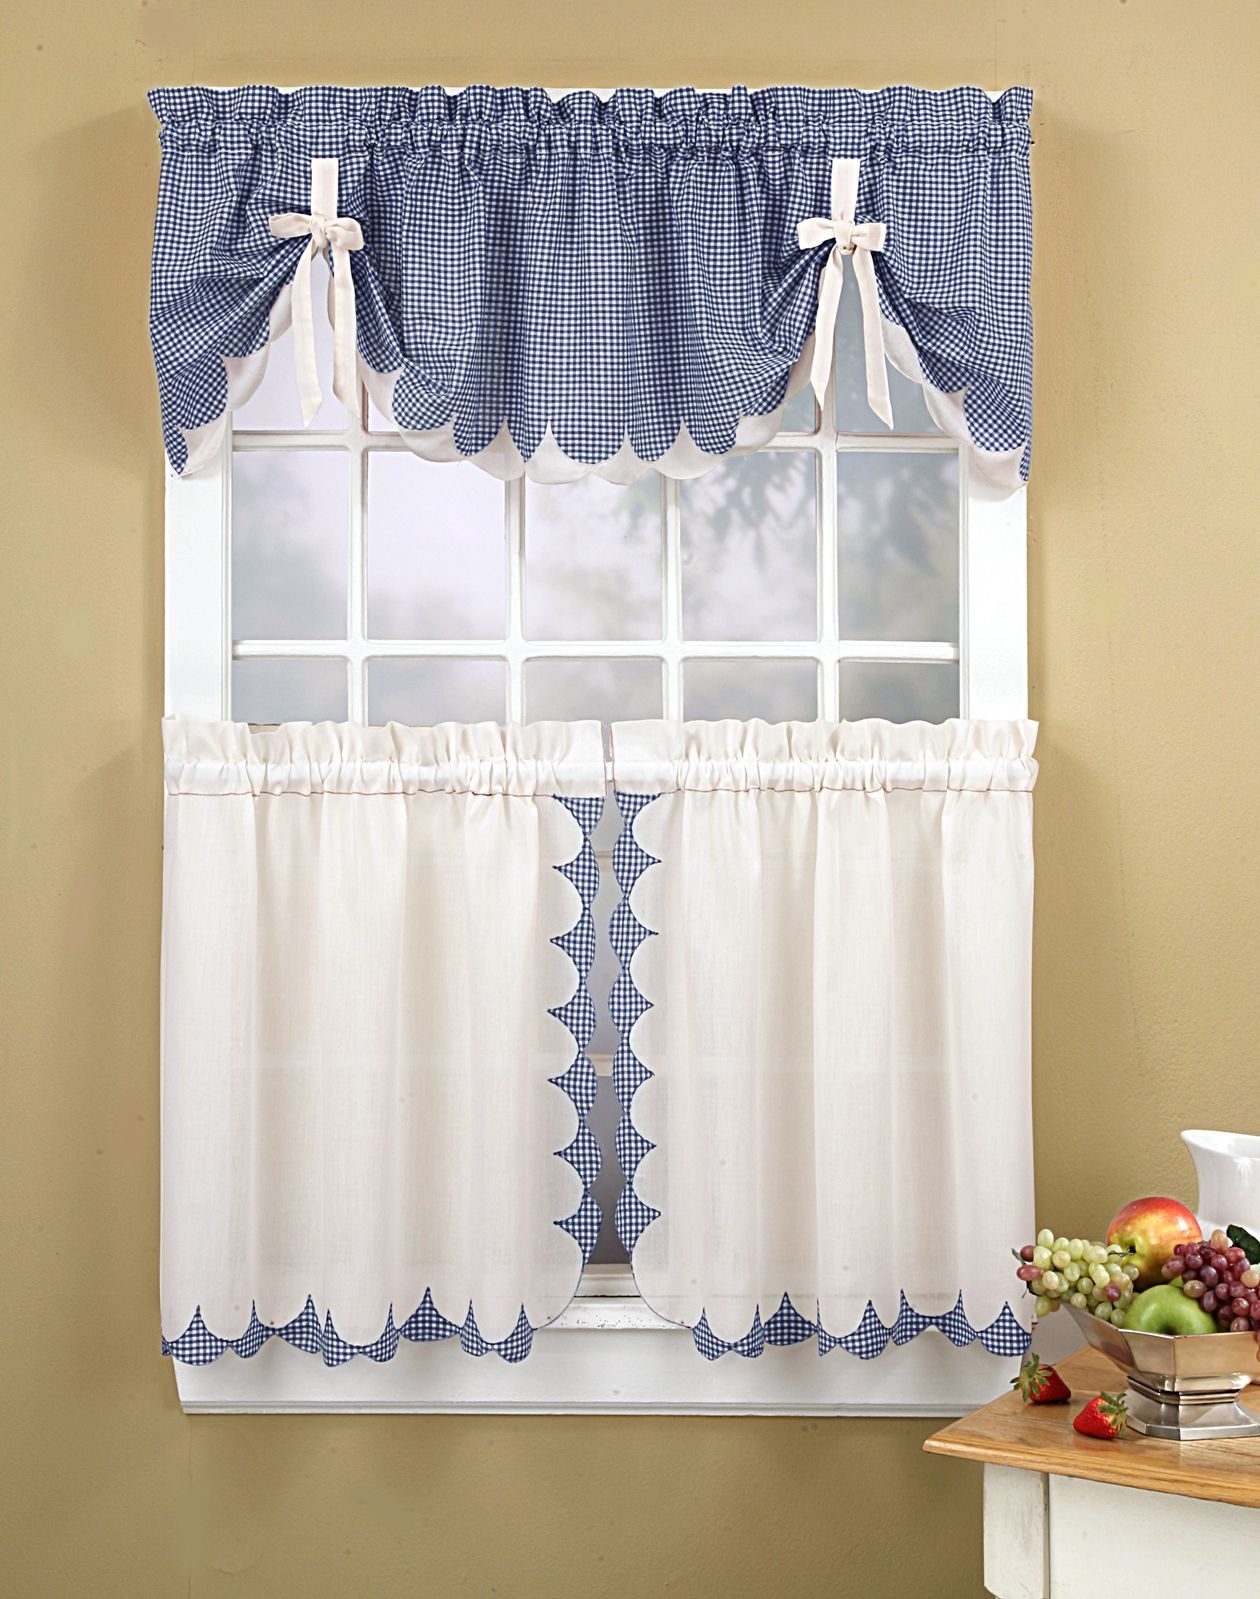 Kitchen Curtains | Tabitha 3 Piece Kitchen Curtain Tier Set Inside Embroidered Floral 5 Piece Kitchen Curtain Sets (View 6 of 20)